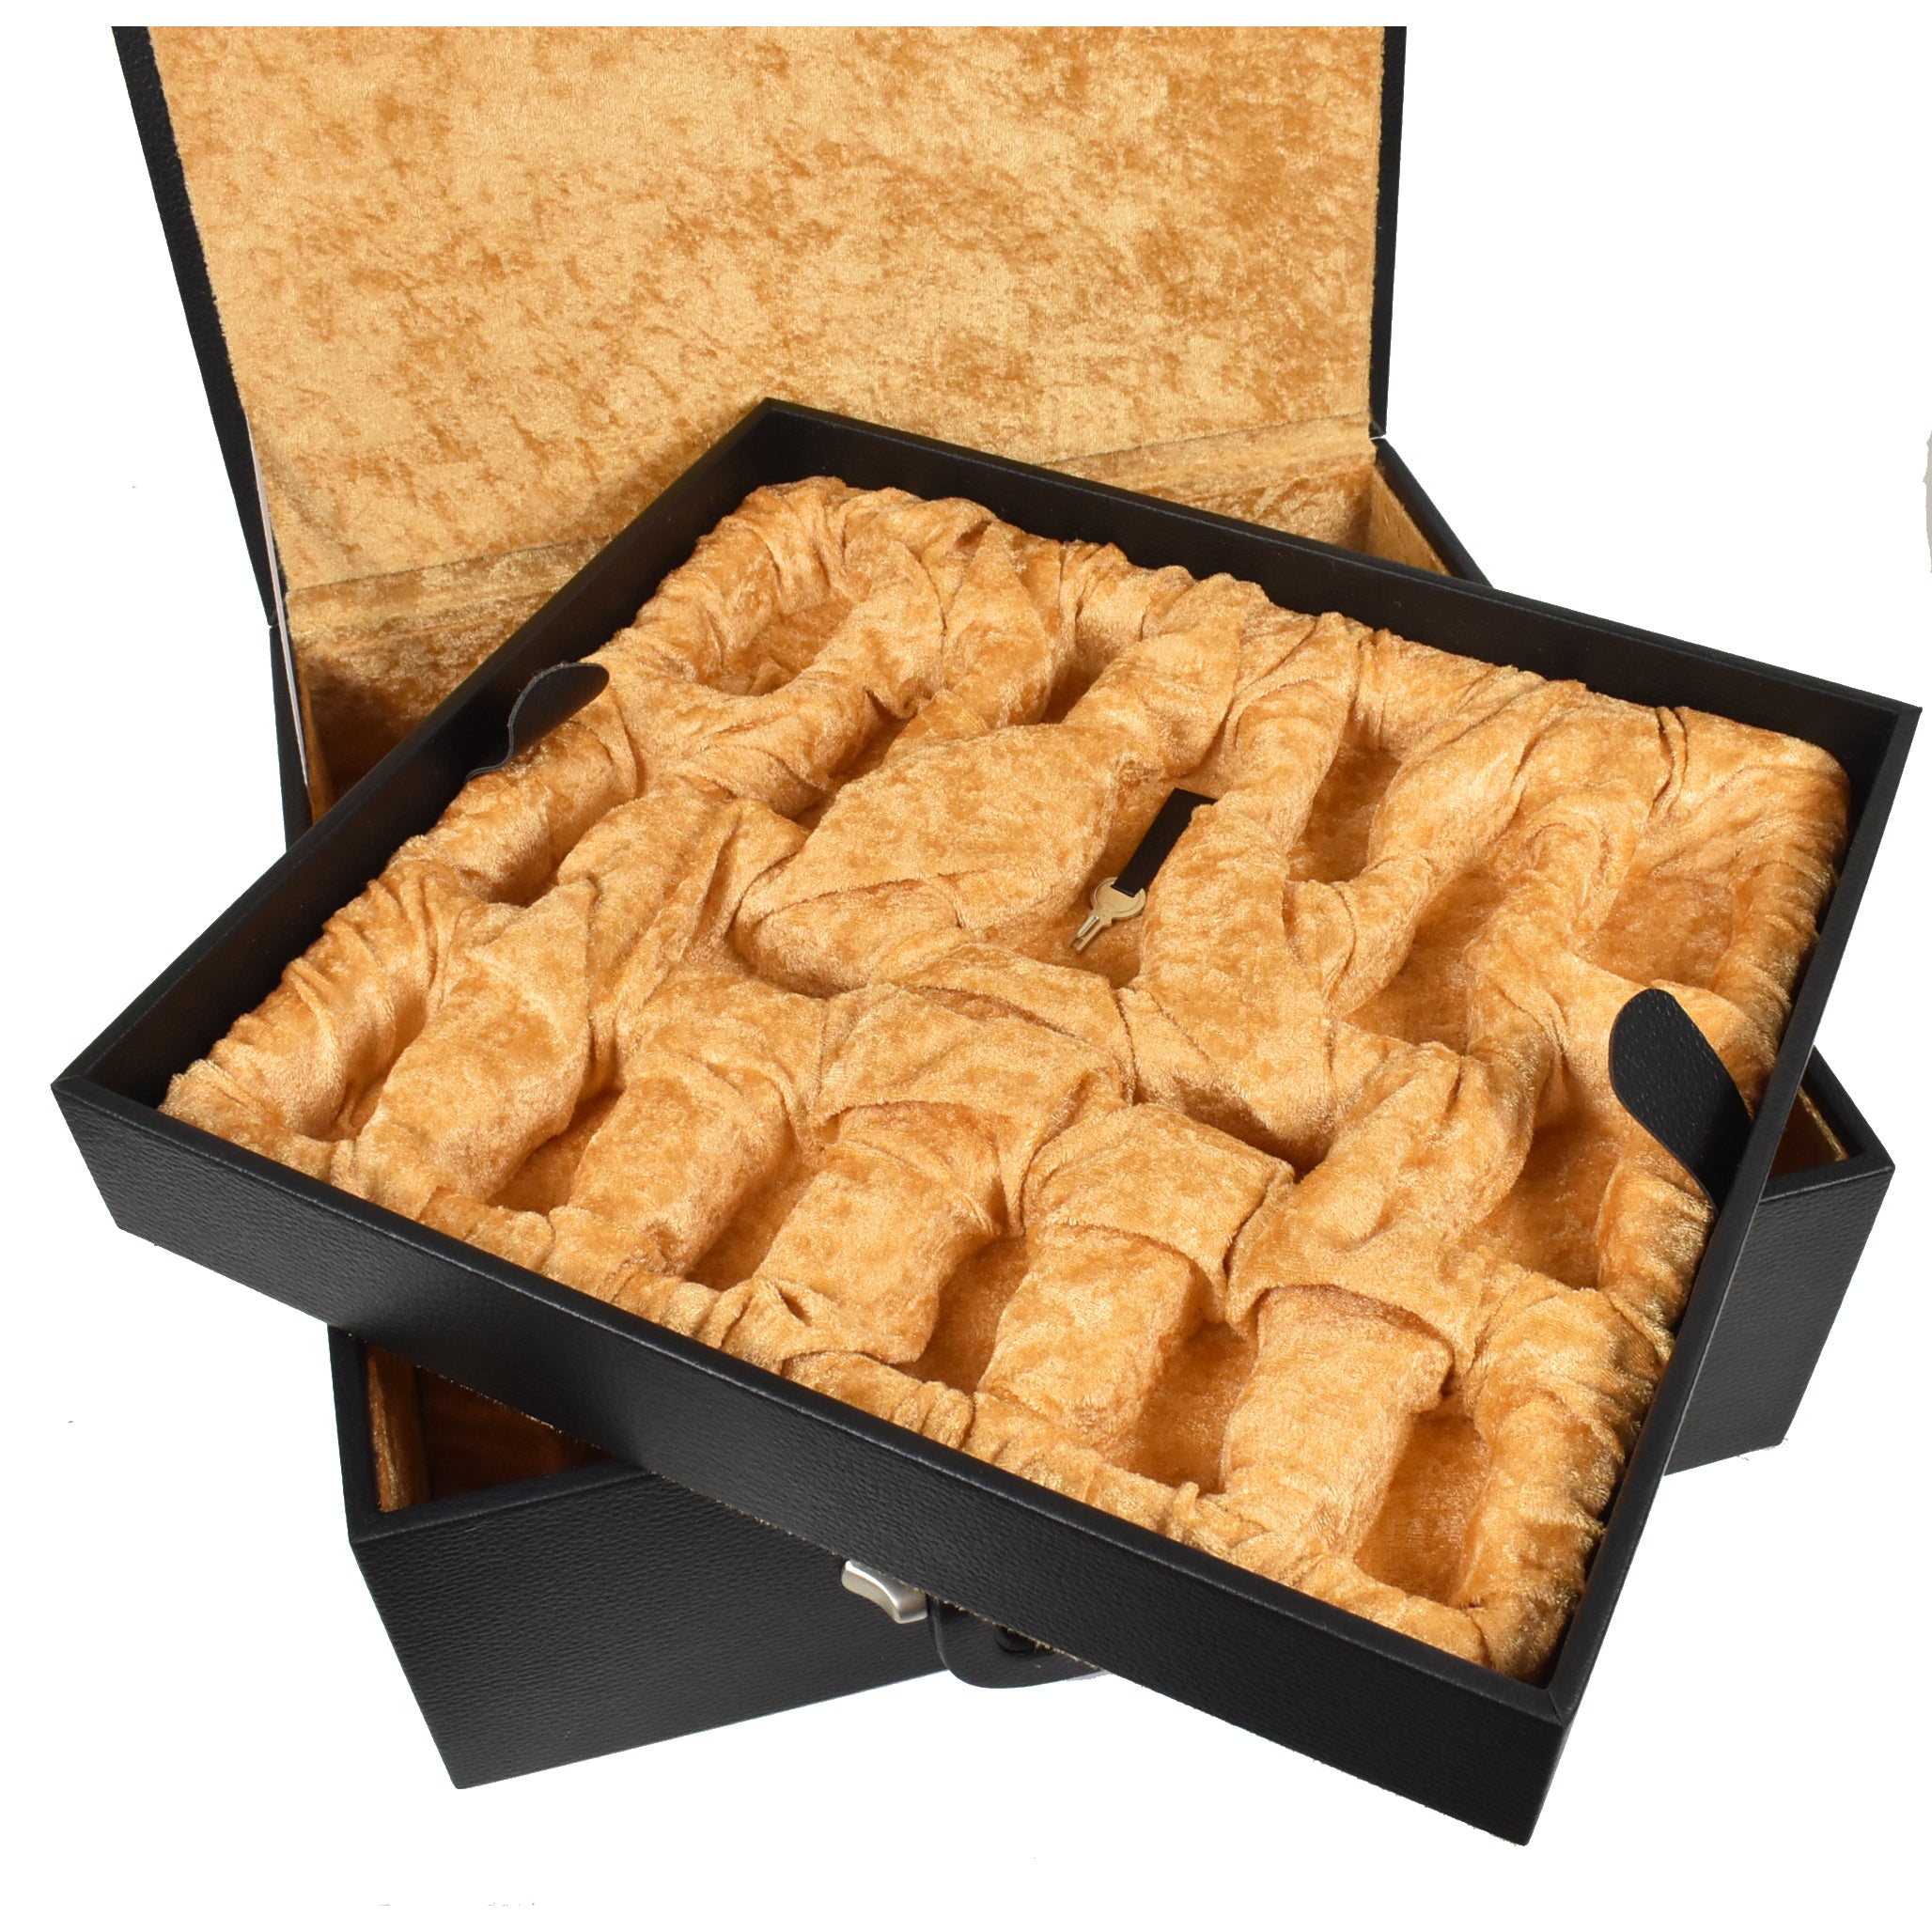 4.2" Luxury Patton Staunton Chess Set Combo - Pieces in Bud Rosewood with 23inches Board and Storage Box